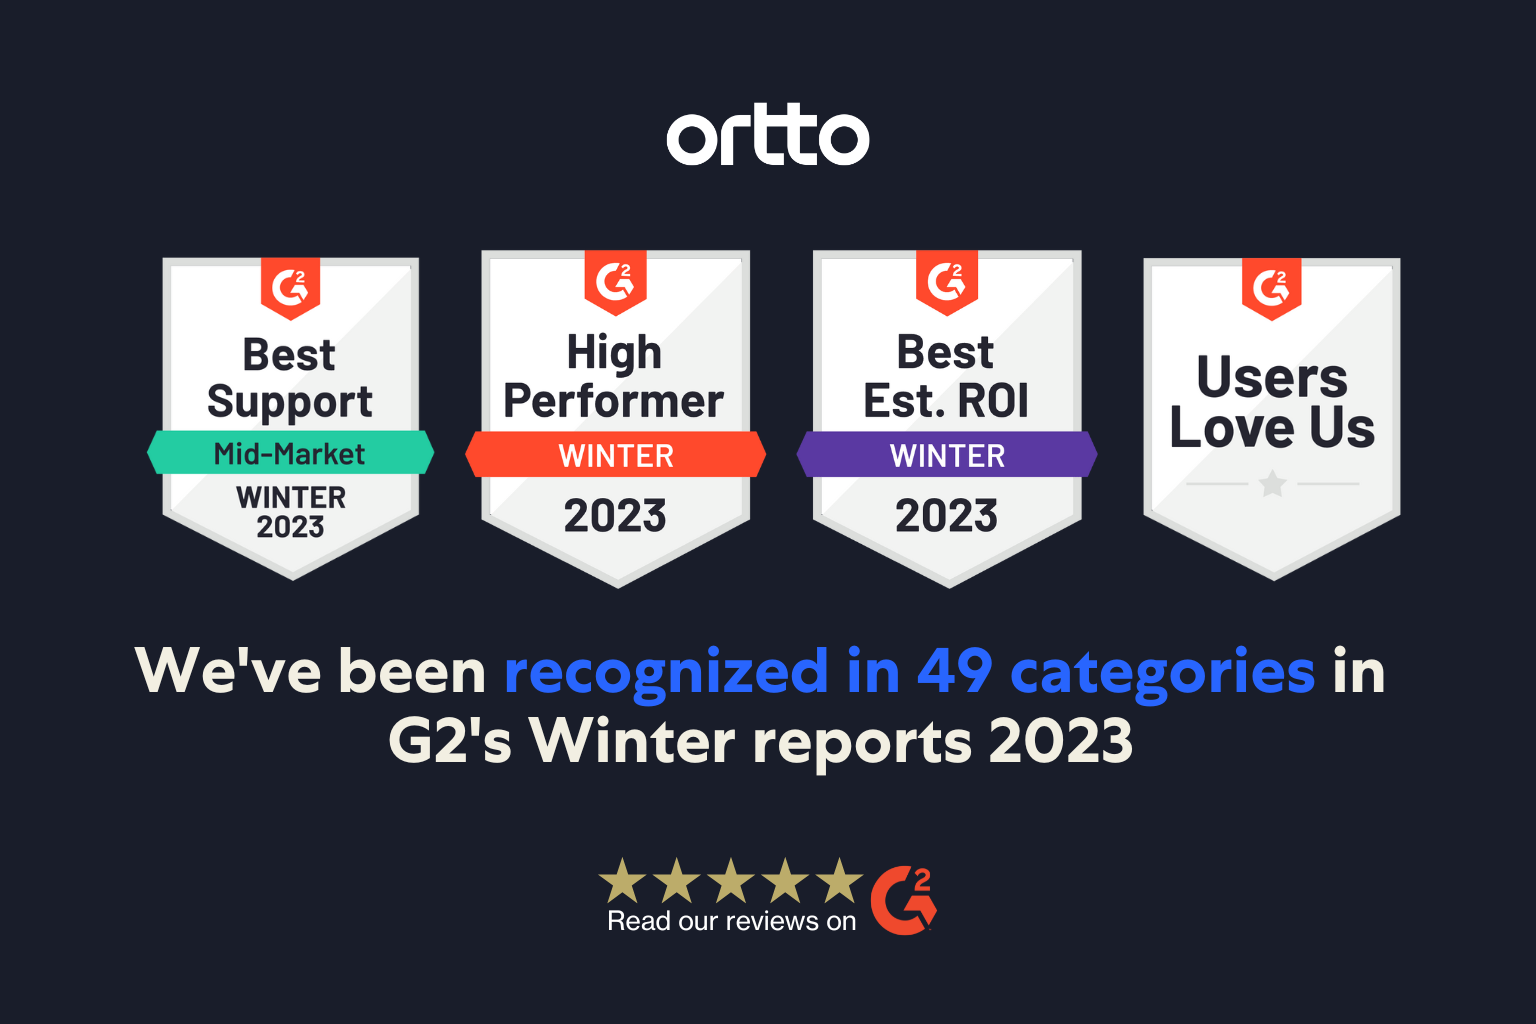 Ortto recognized in 49 categories in G2’s Winter 2023 Reports